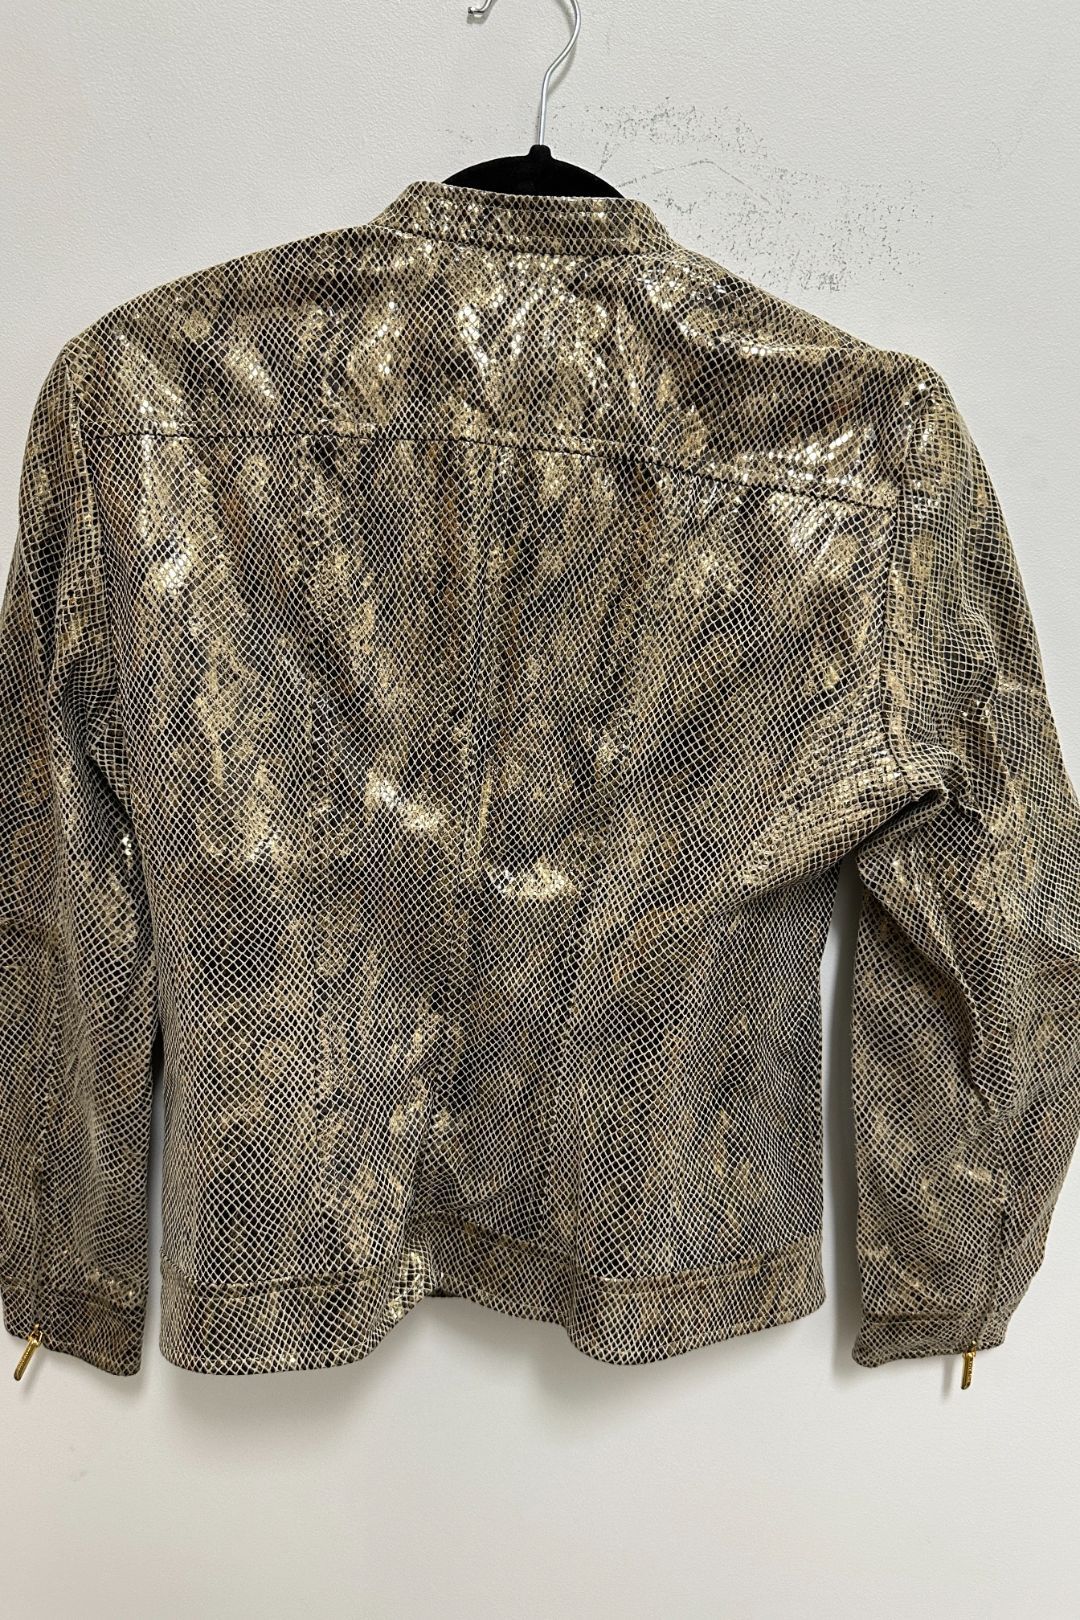 Escada Black and Gold Leather Jacket